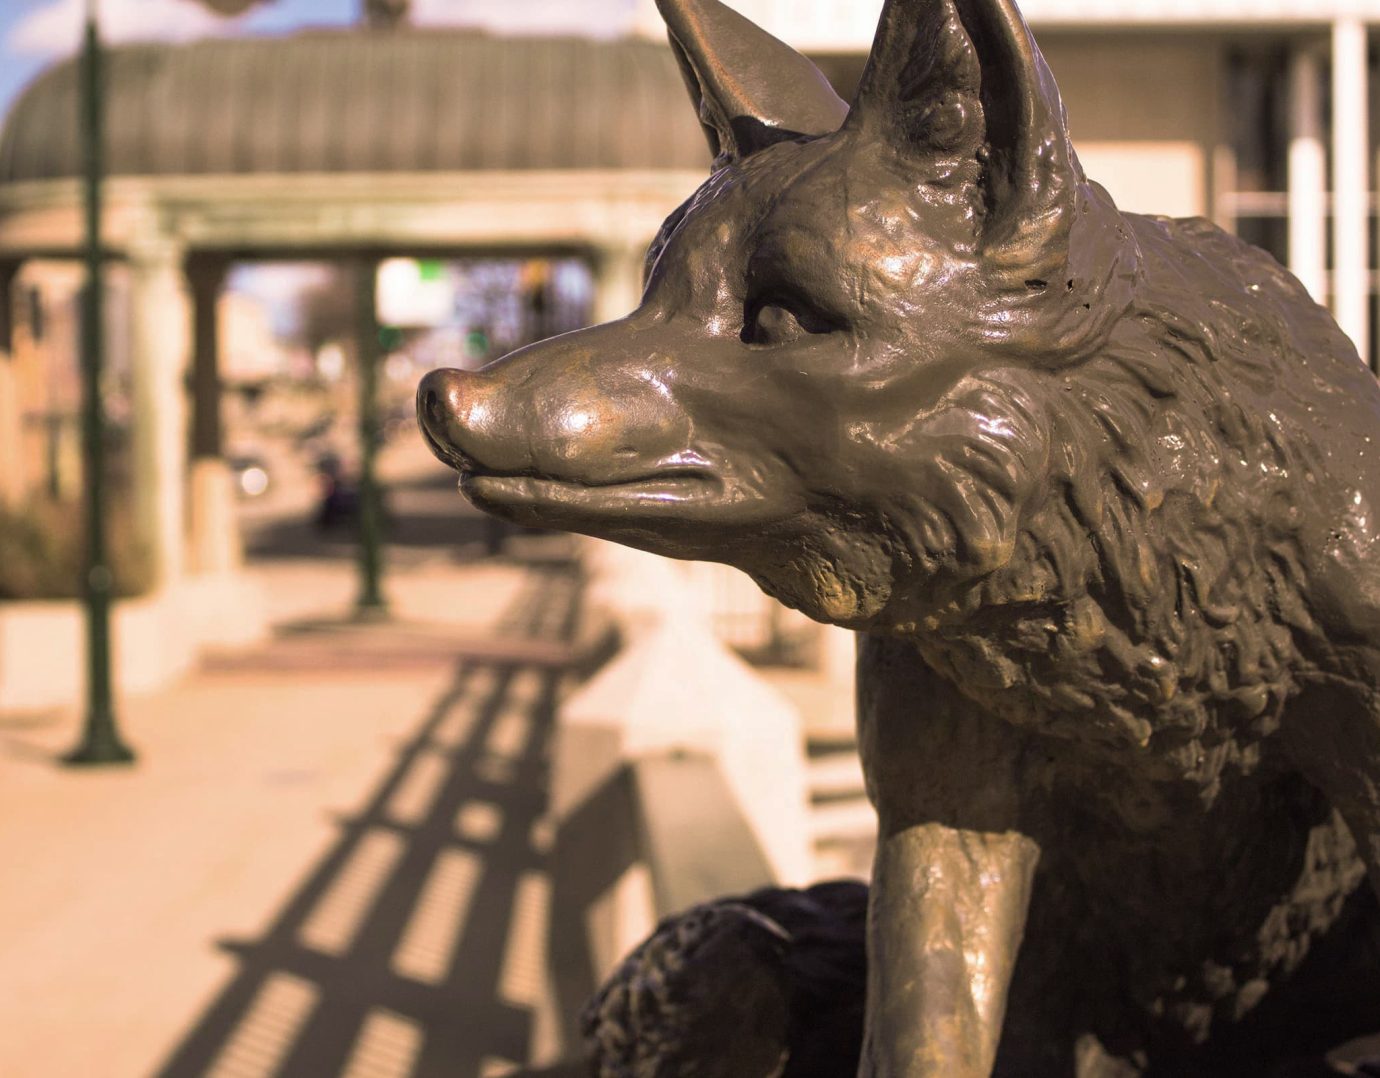 Closeup of the foxes statue on the bridge over Fox River near top St. Charles, IL activities